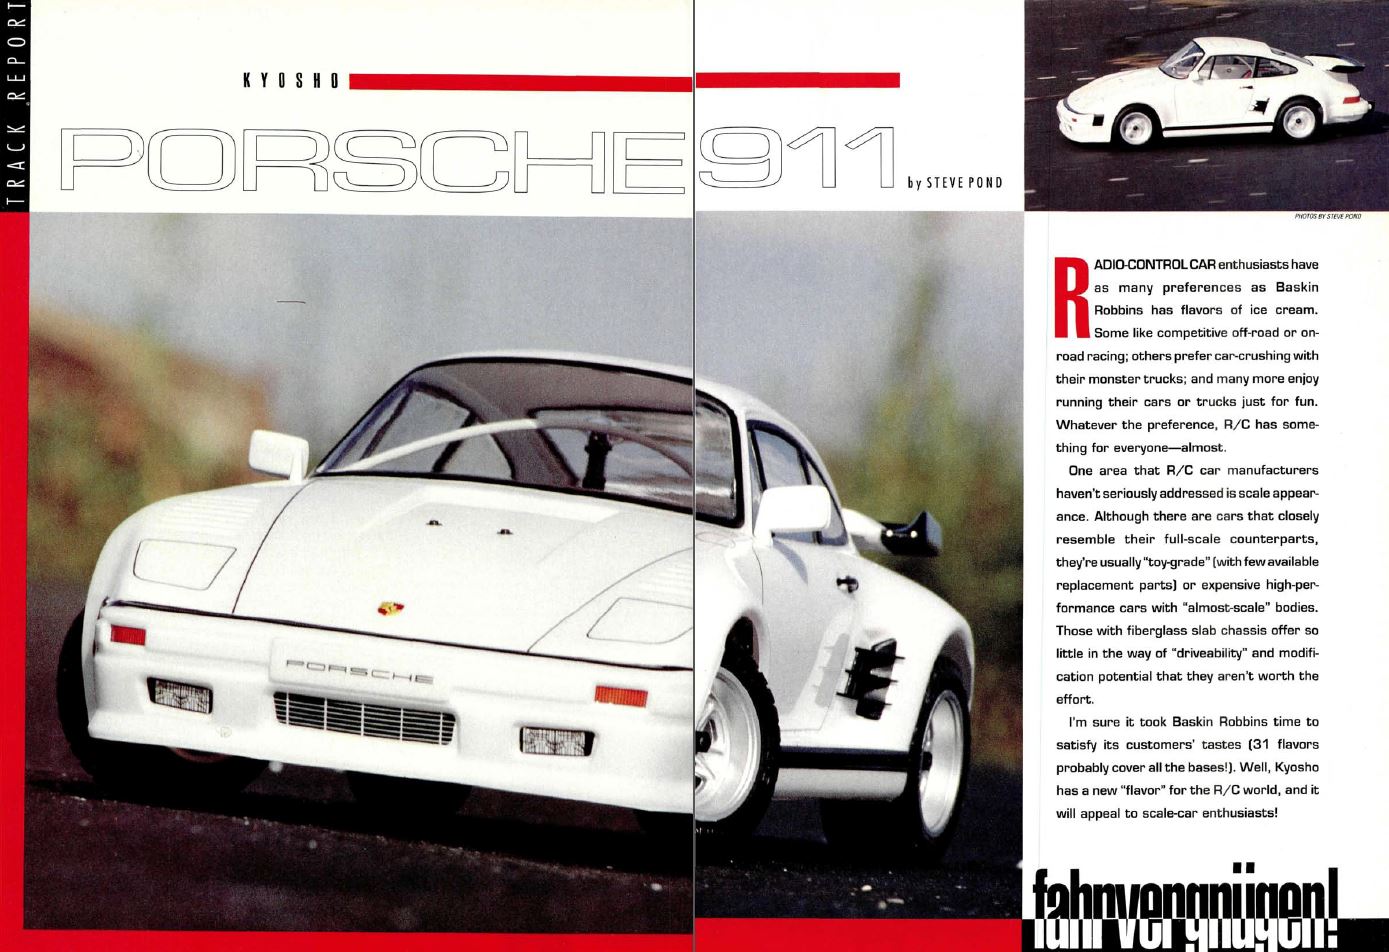 #TBT Kyosho Porsche 911 as it Was Featured In The February 1991 Issue